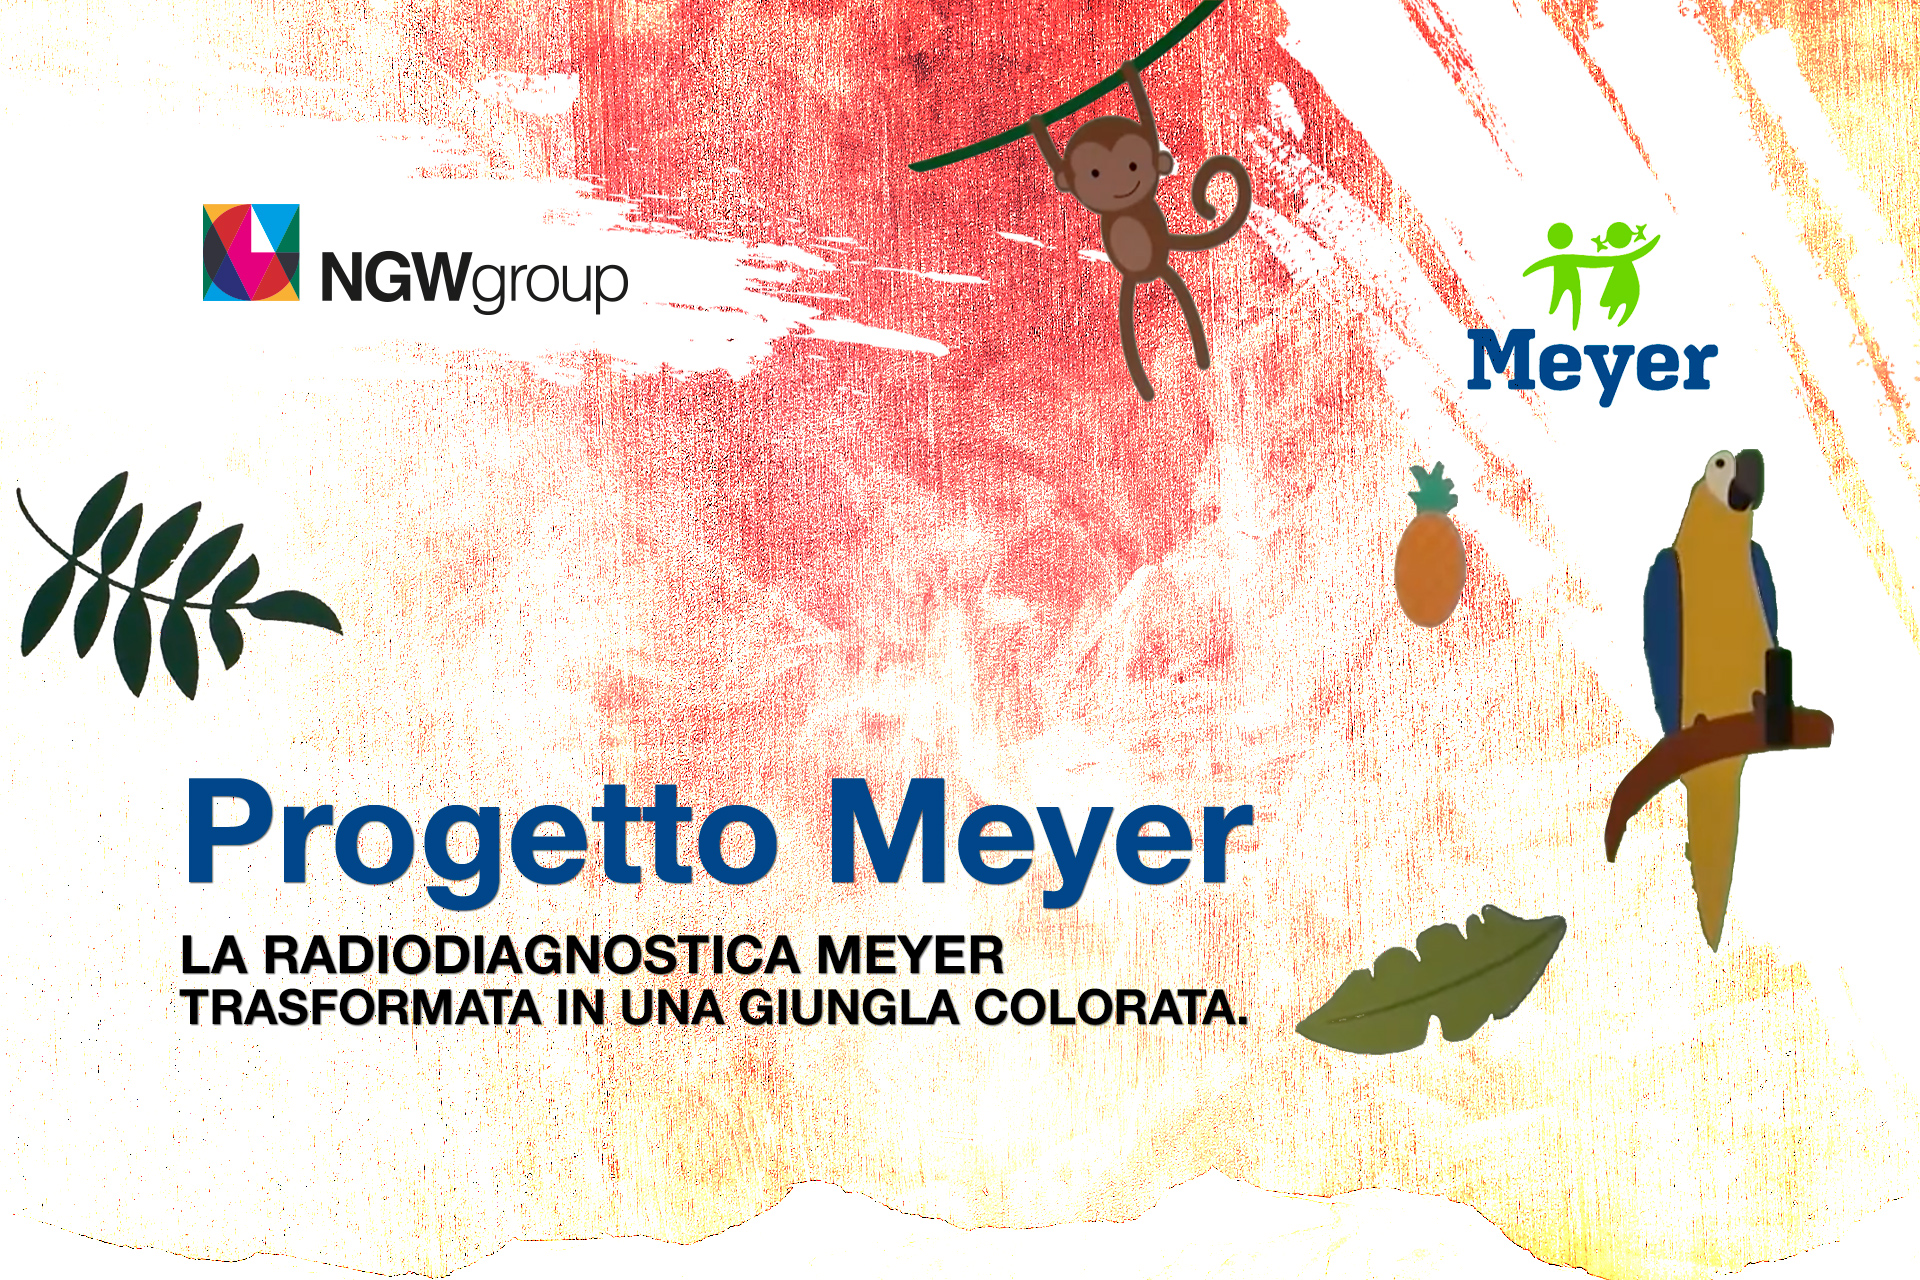 NGW Group per il Meyer